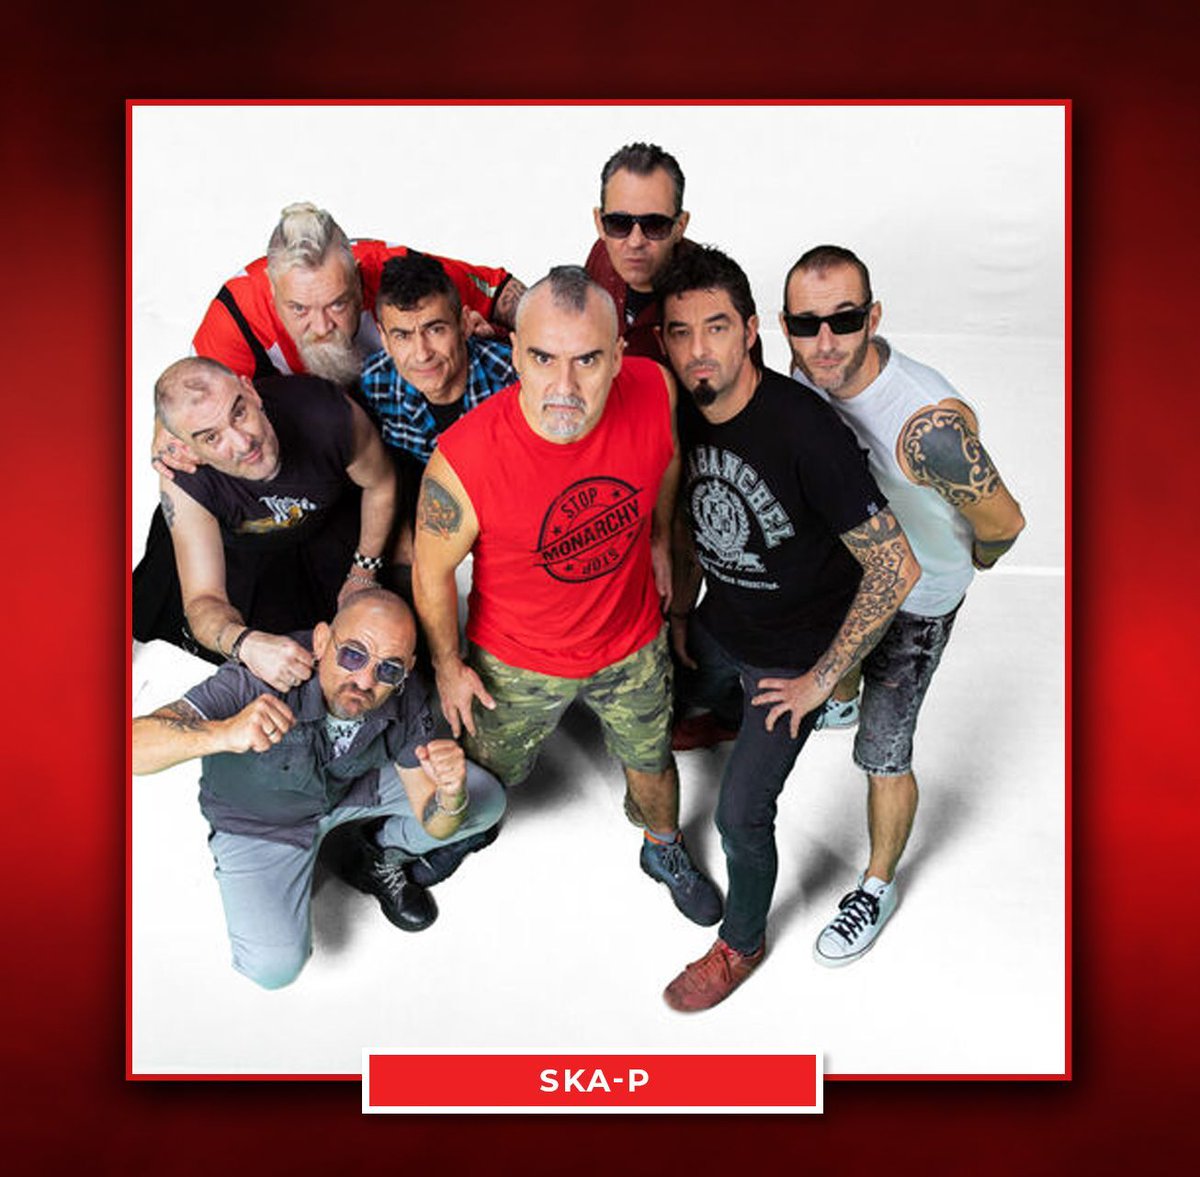 #ST10WeAdmire Ska-P, a Spanish ska punk band, is known for its energetic music and strong political stance. This political stance is evident in their songs, which critique social injustices, political corruption, and capitalist exploitation. smashingtimes.ie/media/newslett…